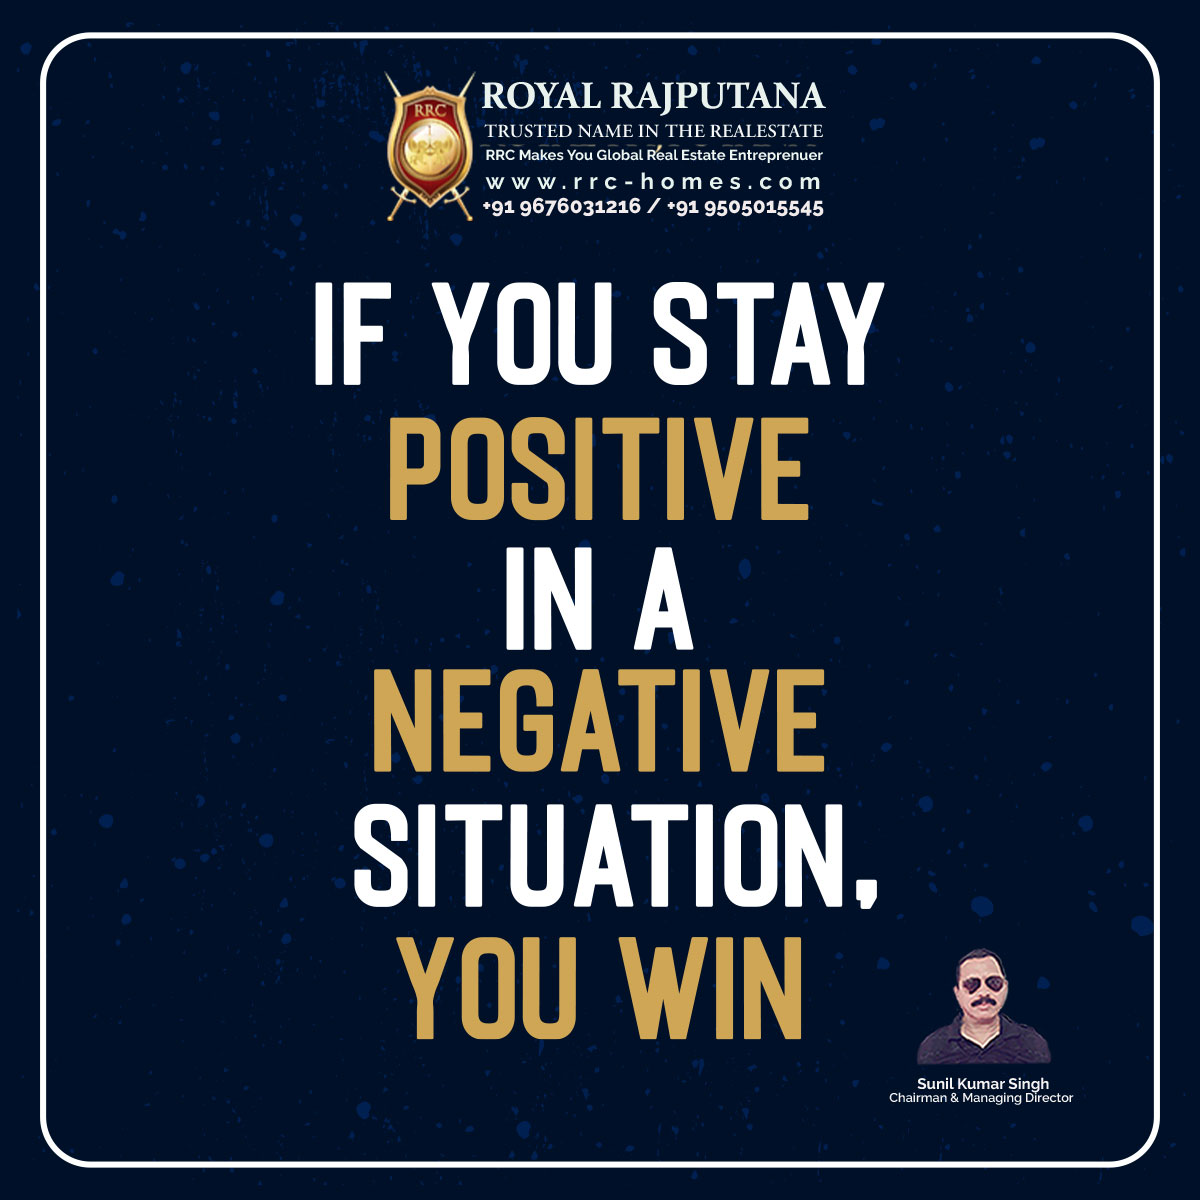 If you stay positive in an negative situation, you win

#royalrajputana #royalrajputanahomes #rrc #rrchomes #sale #lease #rent #propertyservices #properties #aboutrrc #motivational #quote #positive #negative #situation